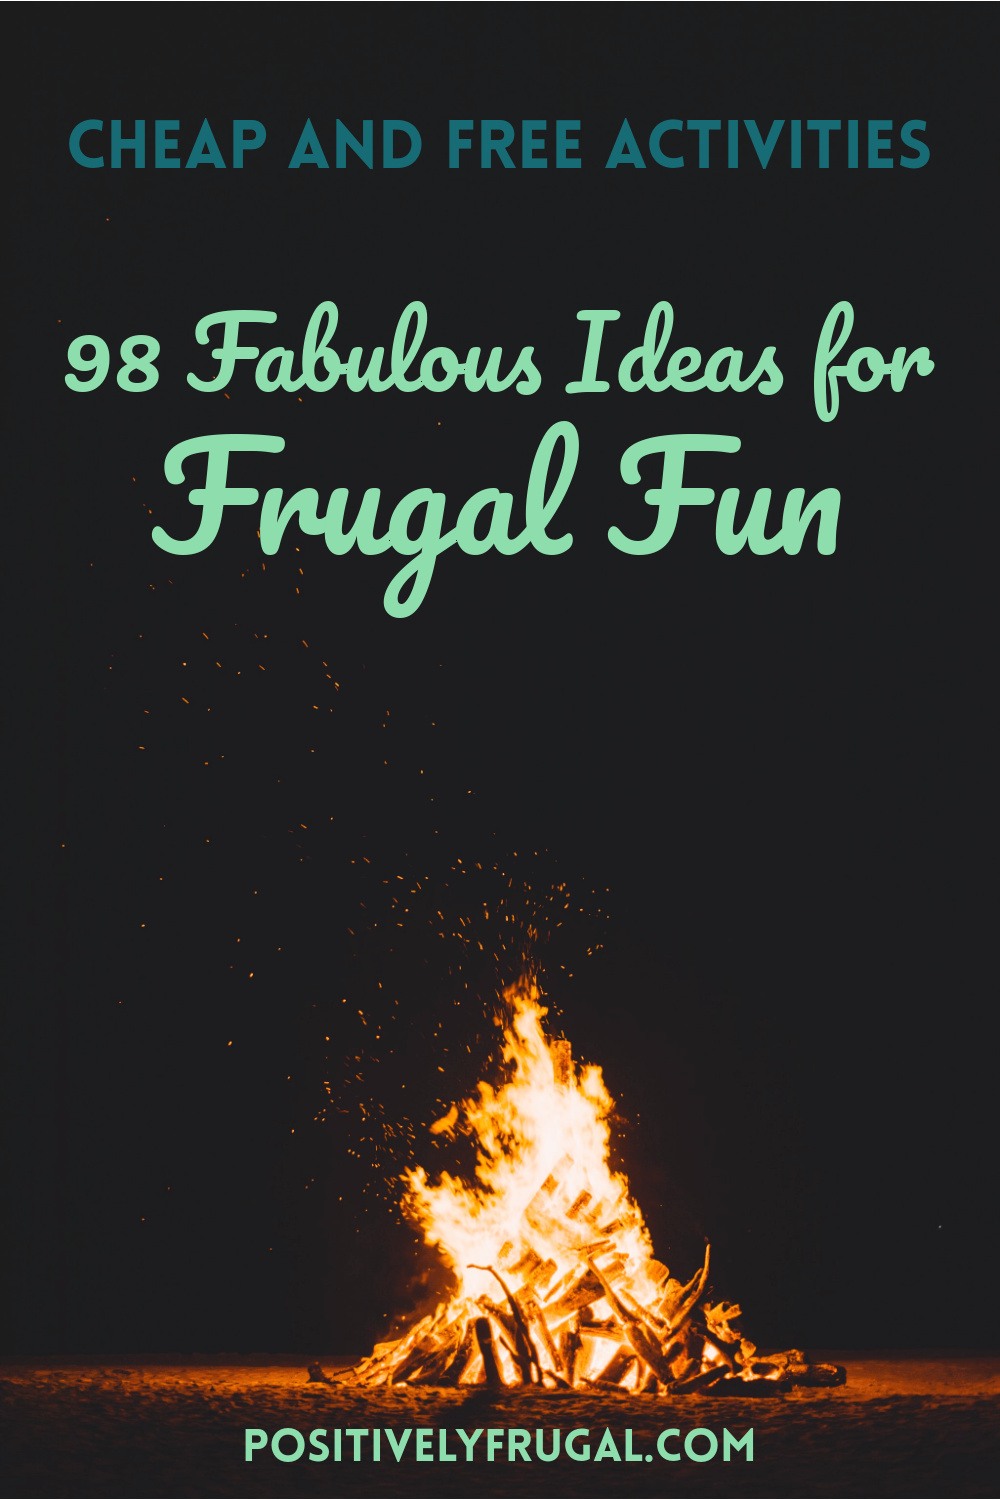 Cheap and Free Activities 98 Fabulous Ideas for Frugal Fun by PositivelyFrugal.com